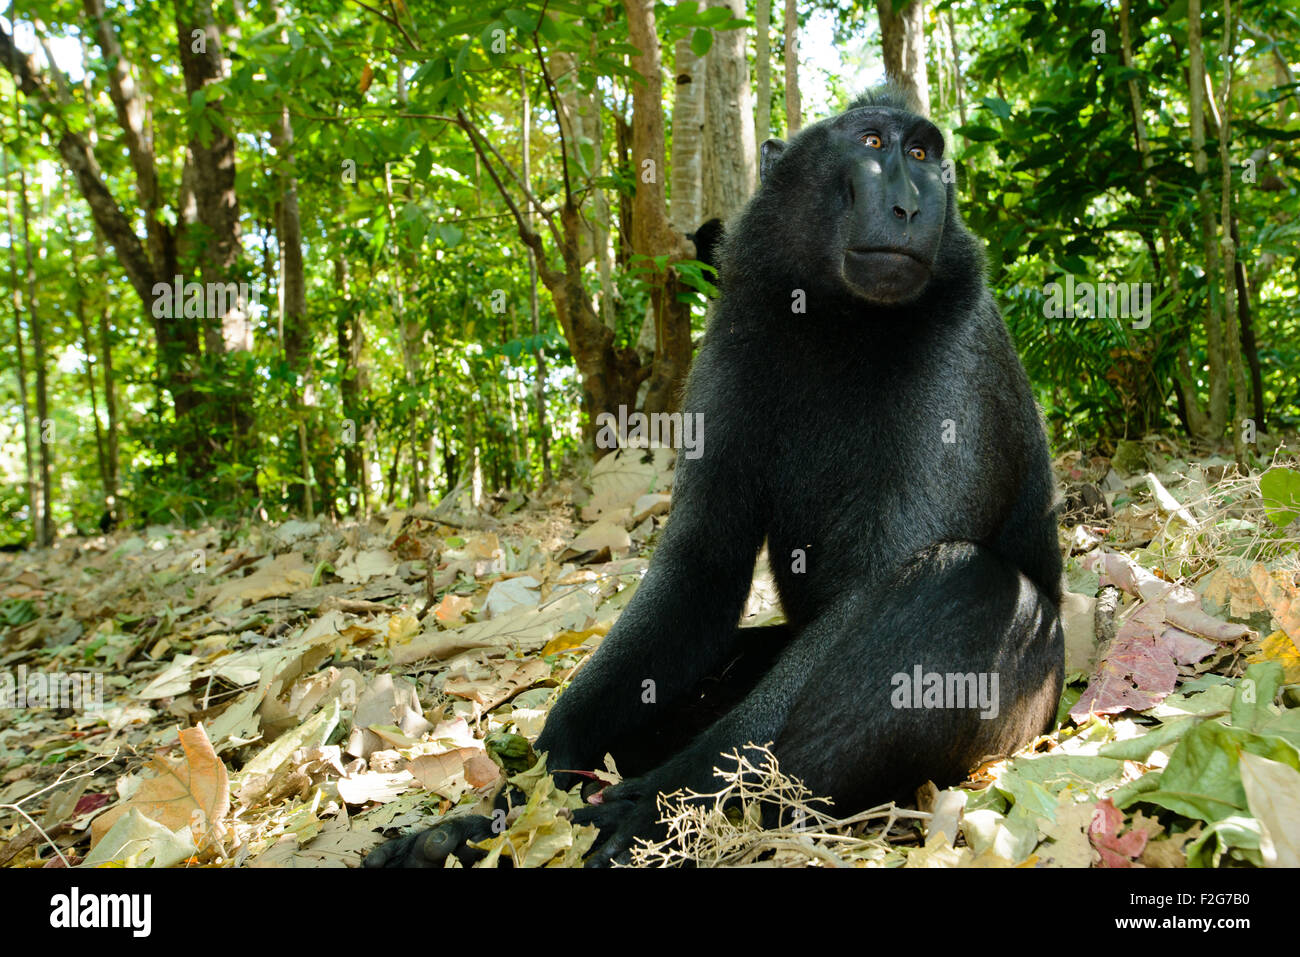 a Single black crested macaque also known as the celebes black macaque relaxes on the ground in the tropical forest Stock Photo